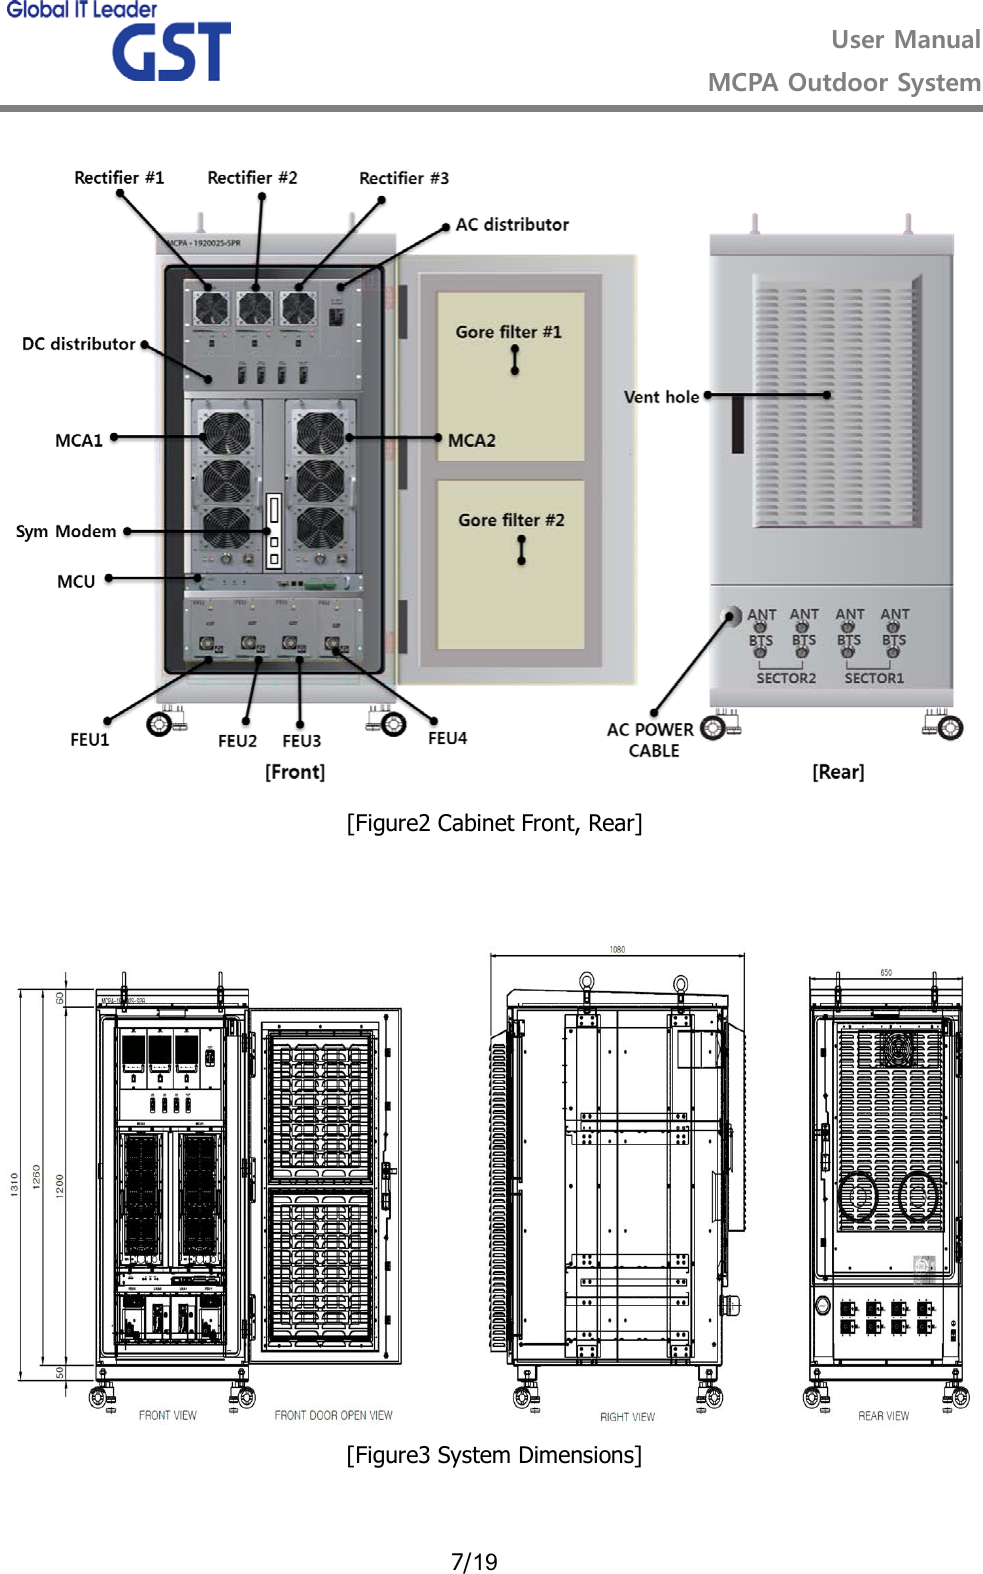  User Manual MCPA Outdoor System   7/19  [Figure2 Cabinet Front, Rear]    [Figure3 System Dimensions]  